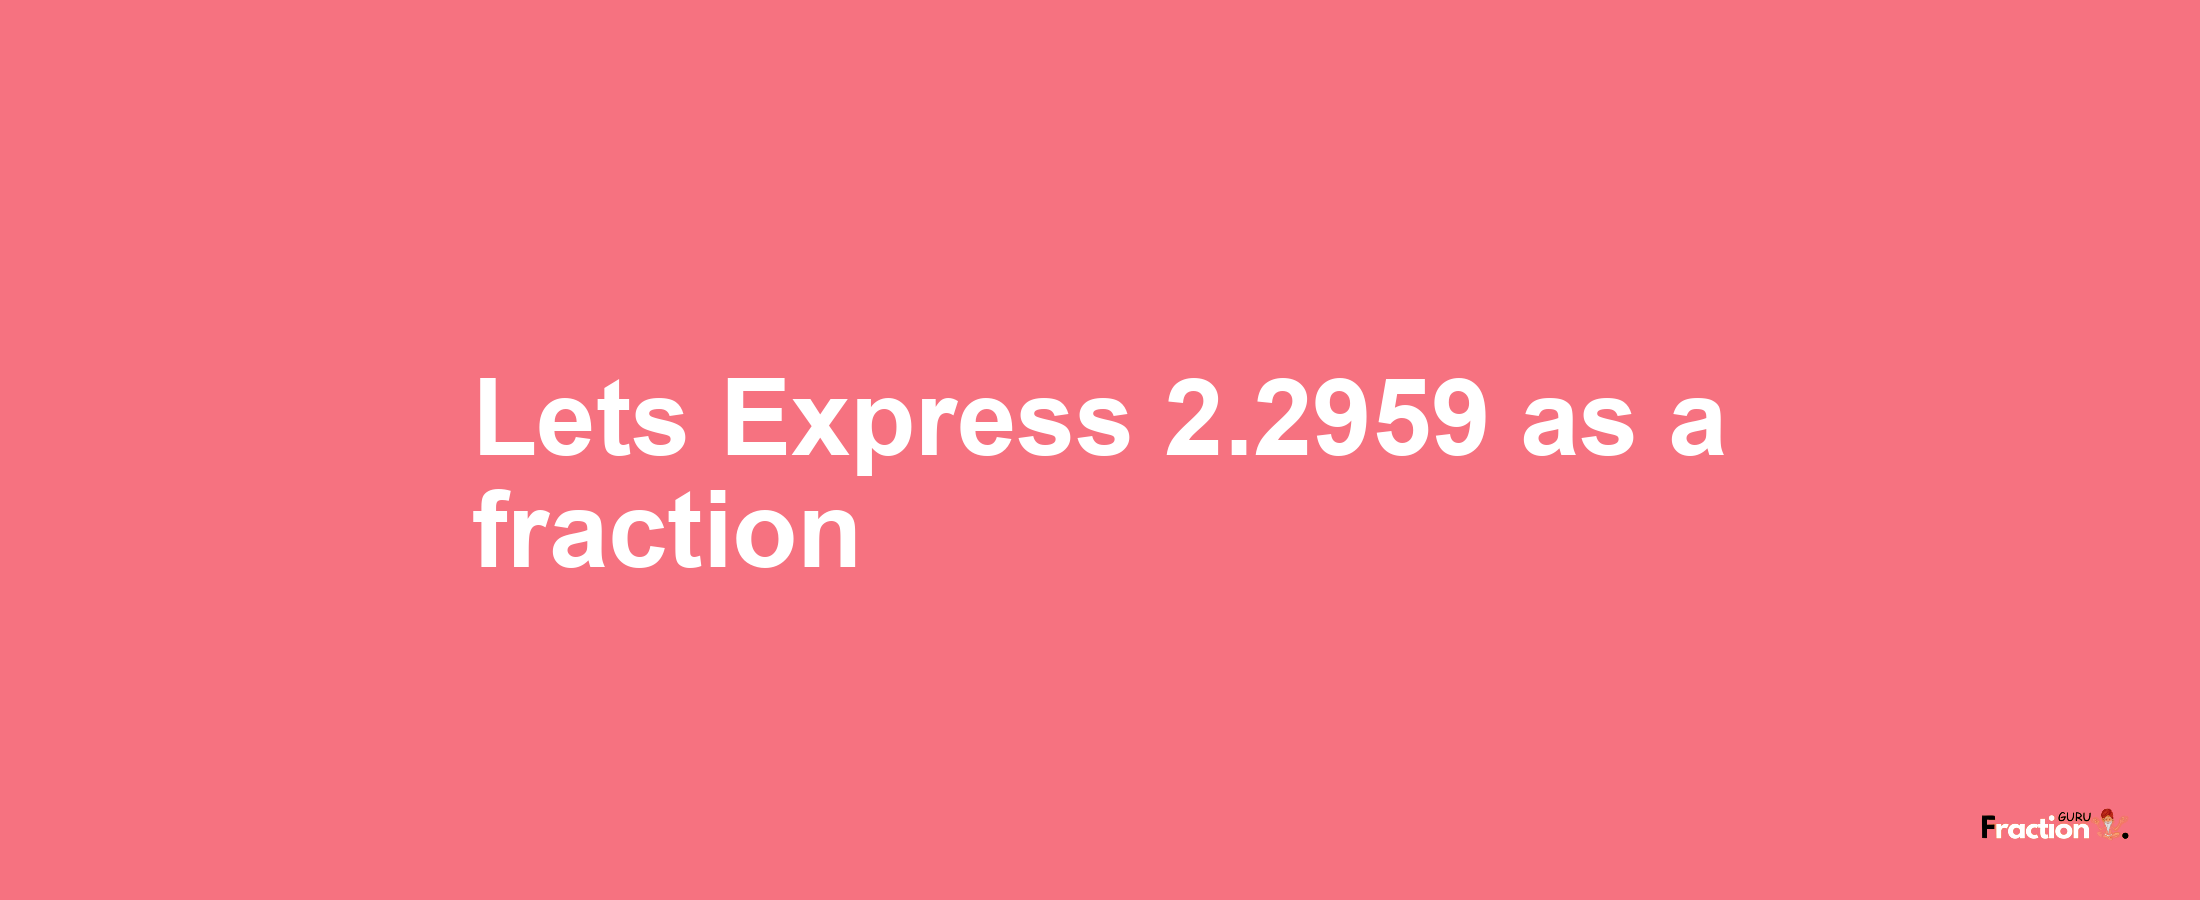 Lets Express 2.2959 as afraction